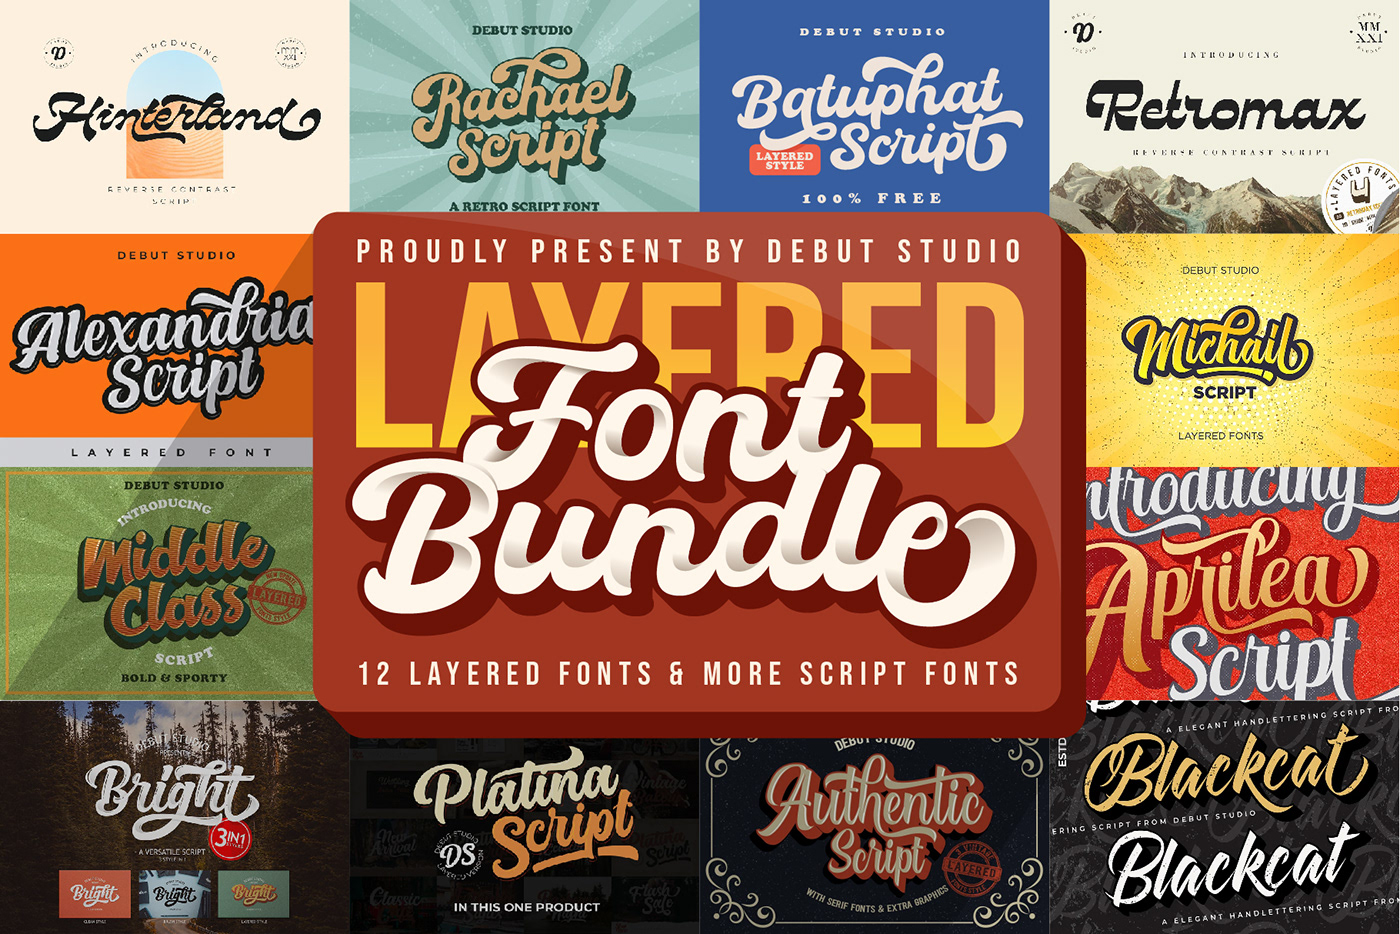 Bold Script craft font debut studio Font Bundle free fonts HAND LETTERING layered fonts Logotype strong typography  